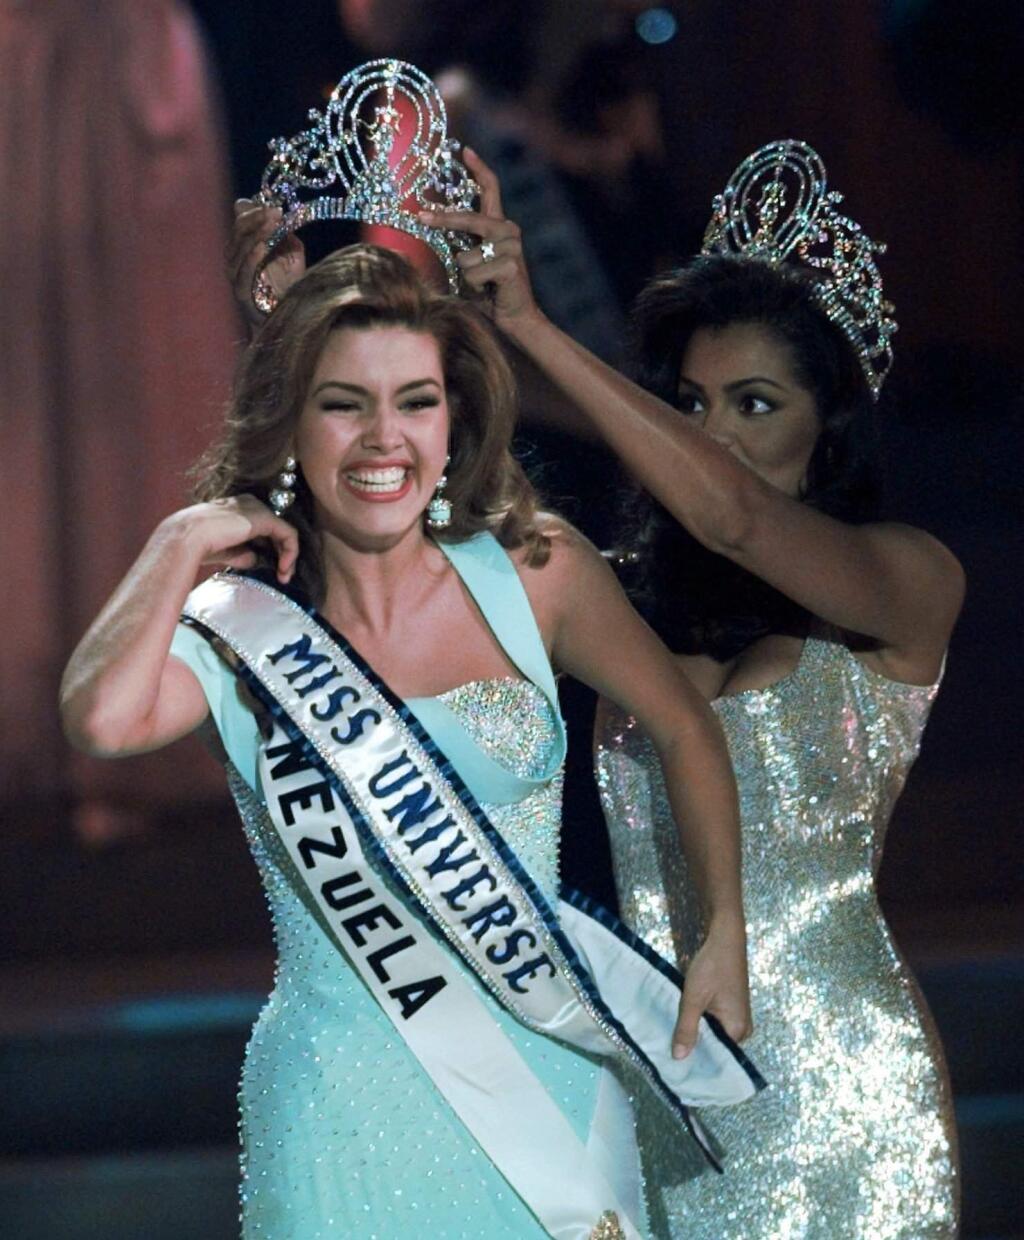 FILE - In this May 17, 1996, file photo, the new Miss Universe Alicia Machado of Venezuela reacts as she is crowned by the 1995 winner Chelsi Smith at the Miss Universe competition in Las Vegas. Machado became a topic of conversation during the first presidential debate between Republican nominee Donald Trump and Democratic candidate Hillary Clinton on Sept. 27, 2016. (AP Photo/Eric Draper, File)